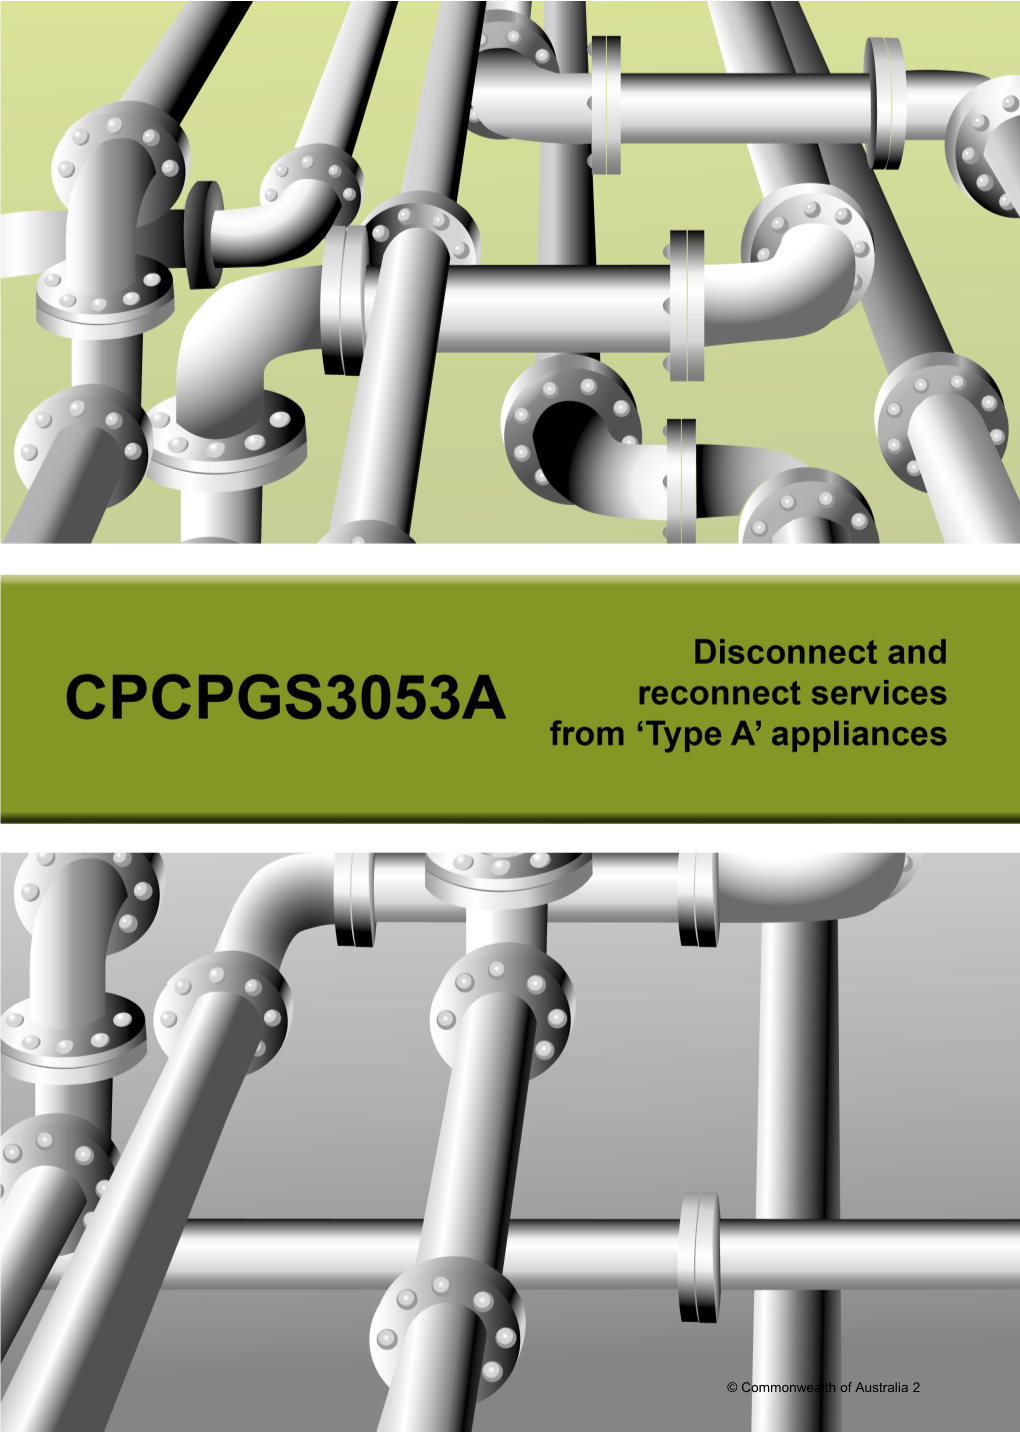 Cpcpgs3053a - Disconnect and Reconnect Services from Type a Gas Appliances